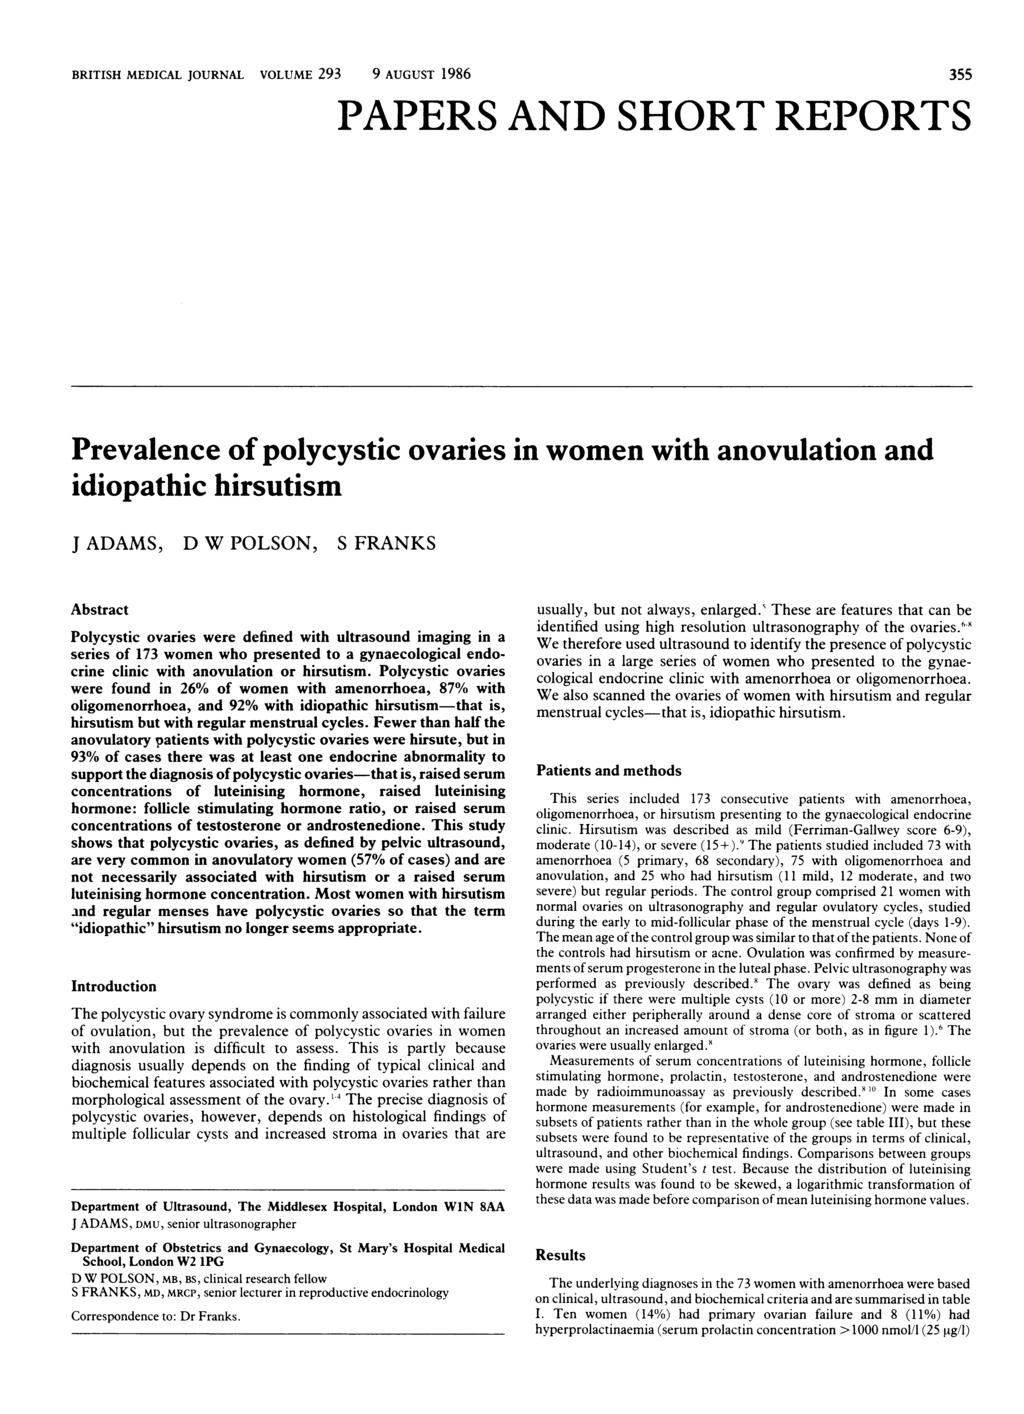 BRITISH MEDICAL JOURNAL VOLUME 293 9 AUGUST 1986 355 PAPERS AND SHORT REPORTS Prevalence of polycystic ovaries in women with anovulation and idiopathic hirsutism J ADAMS, D W POLSON, S FRANKS